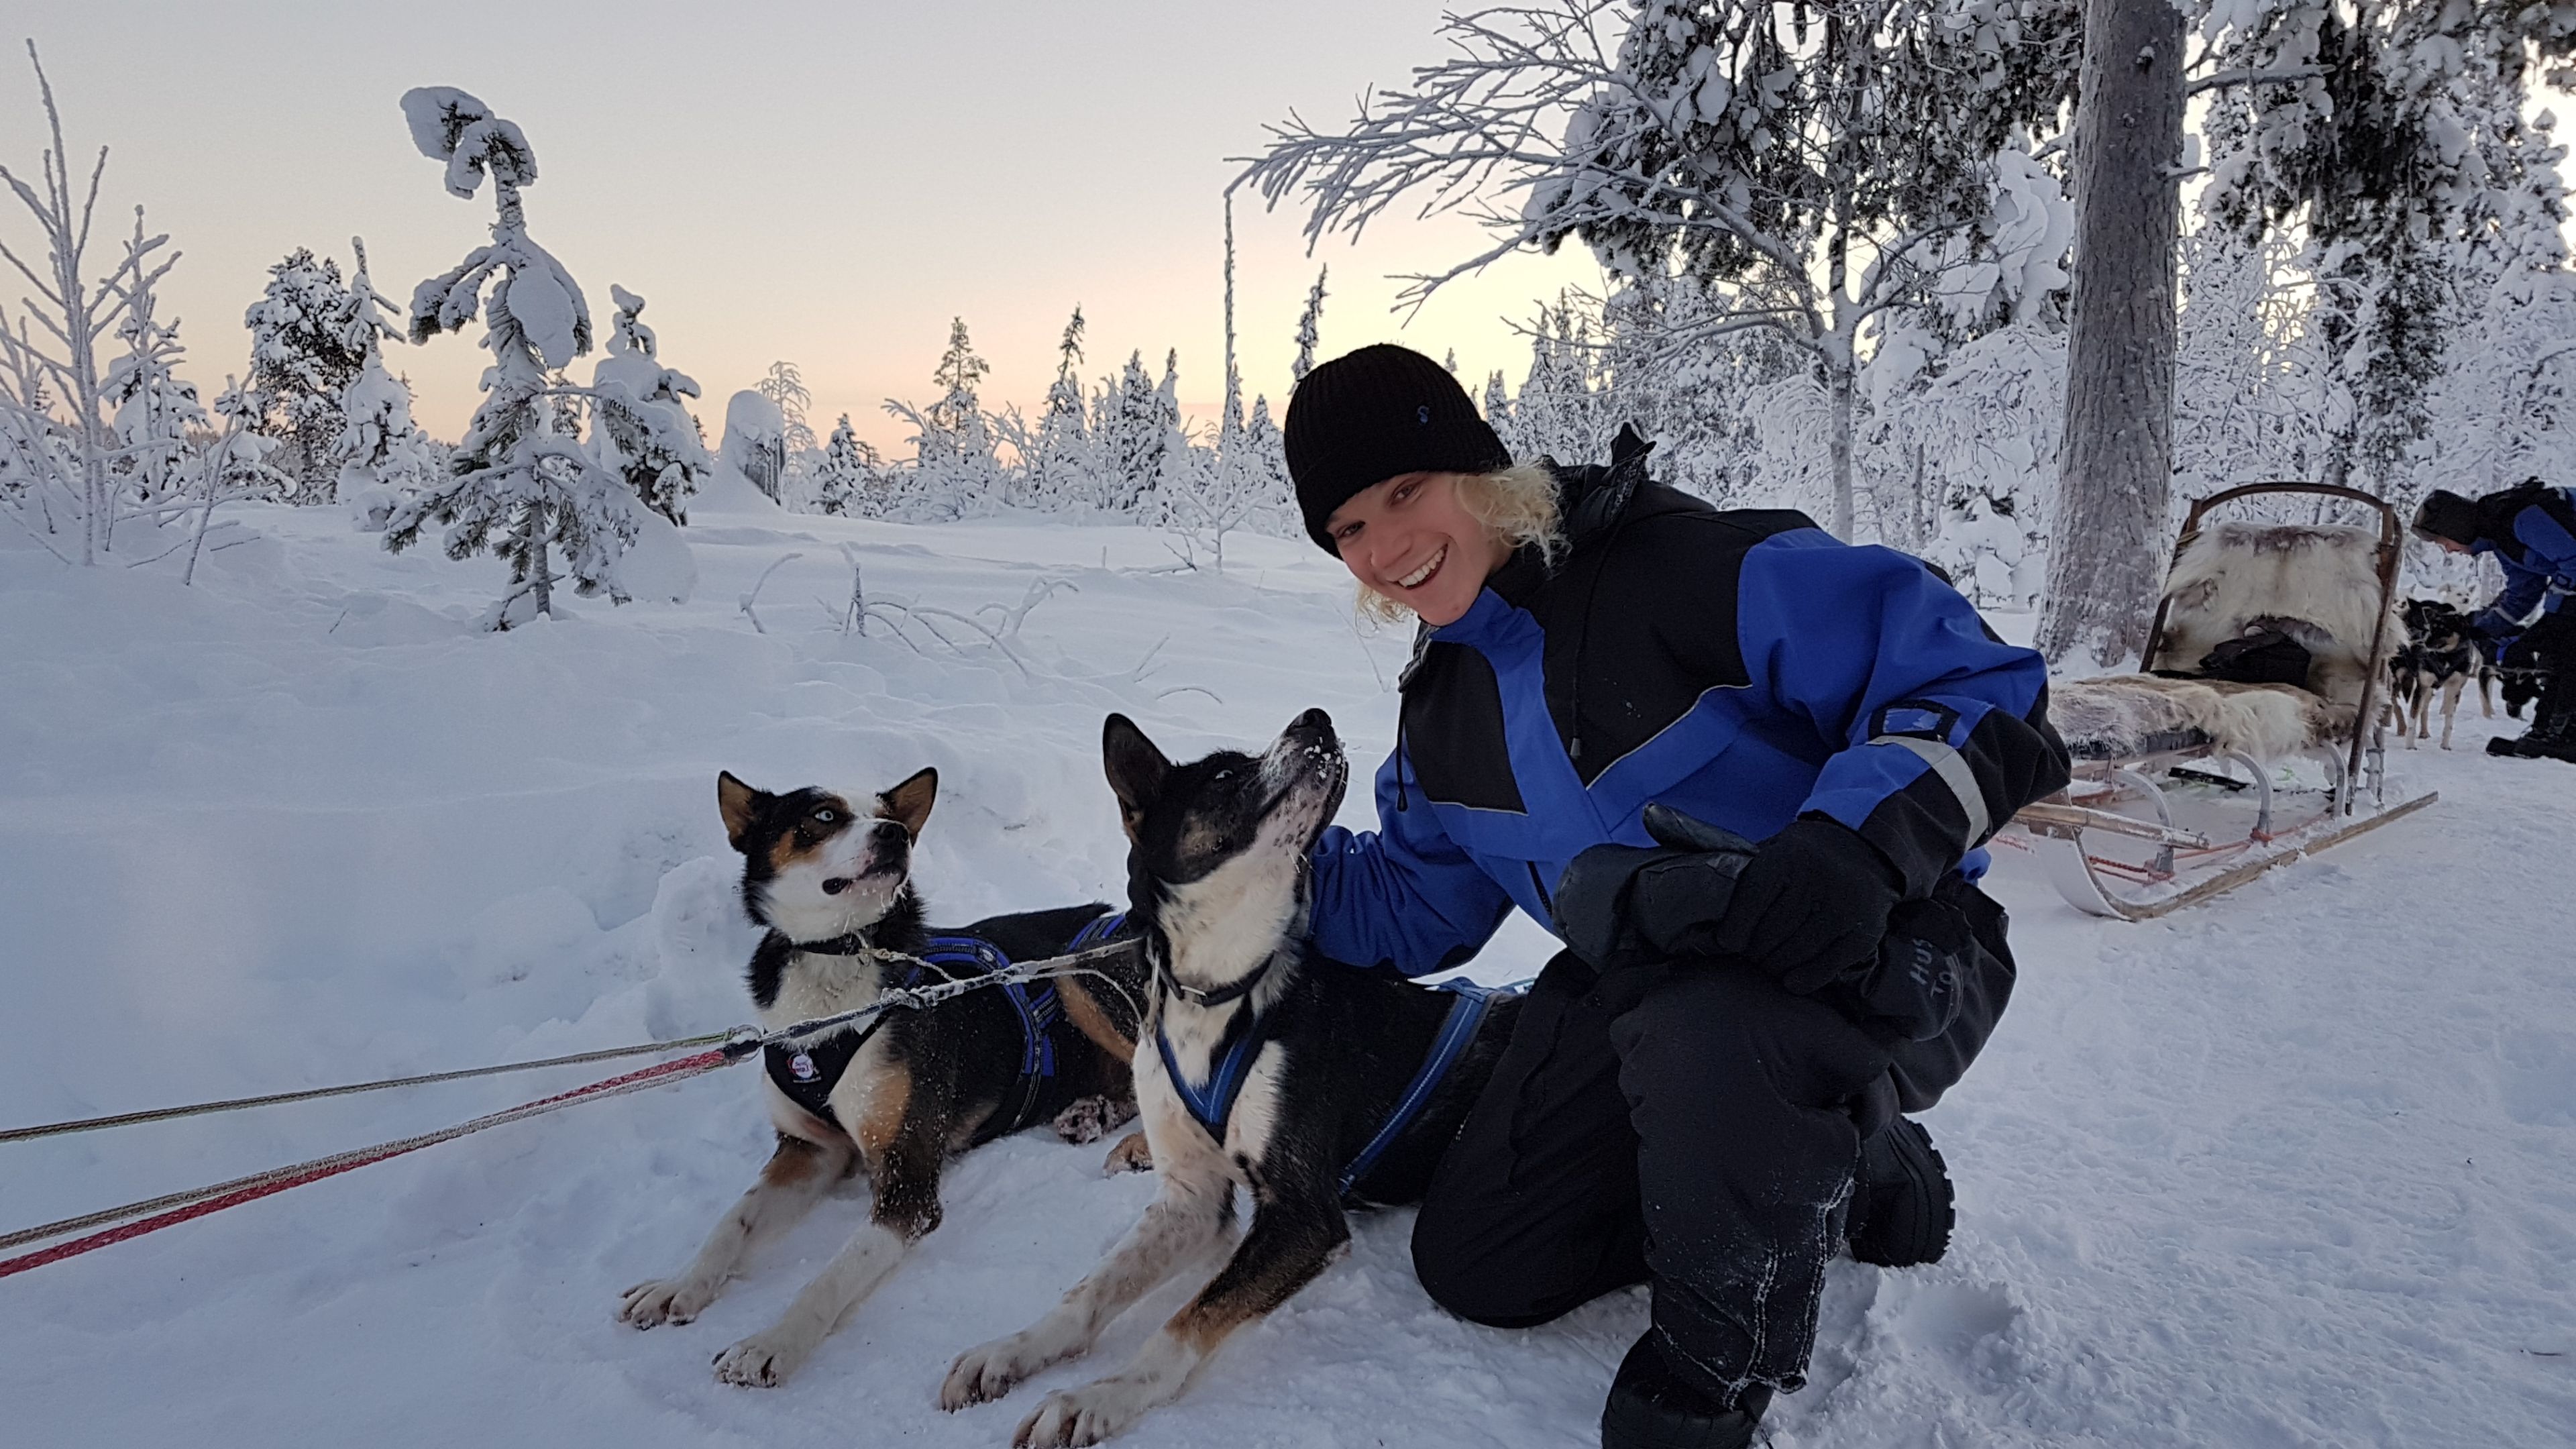 Study Abroad student smiling a camera in snow covered Sweden with a dog sled in background